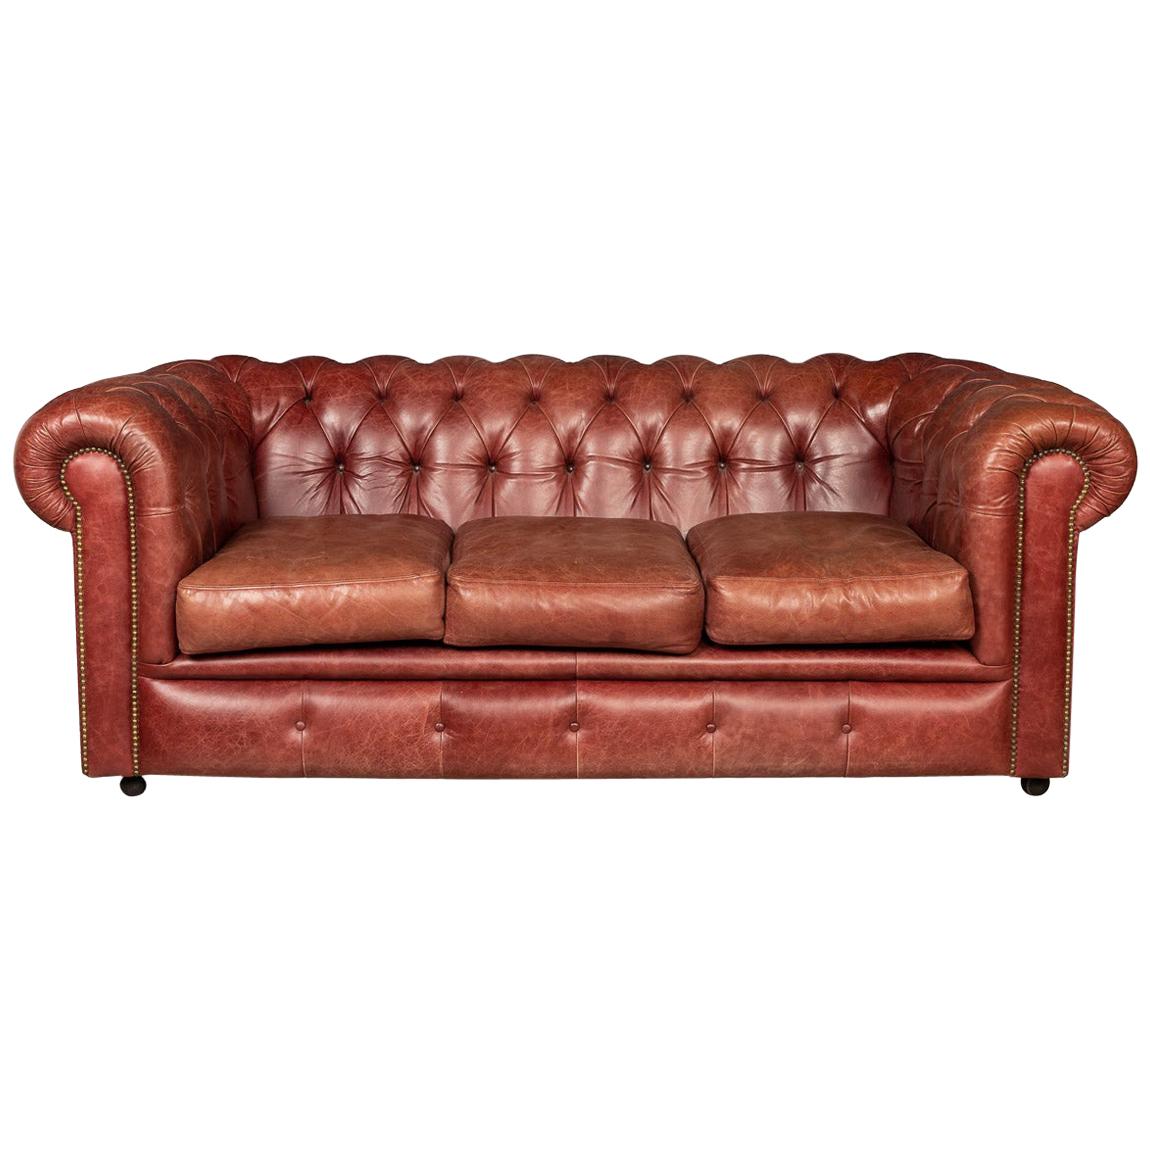 20th Century Chesterfield Leather Sofa With Button Down Seat